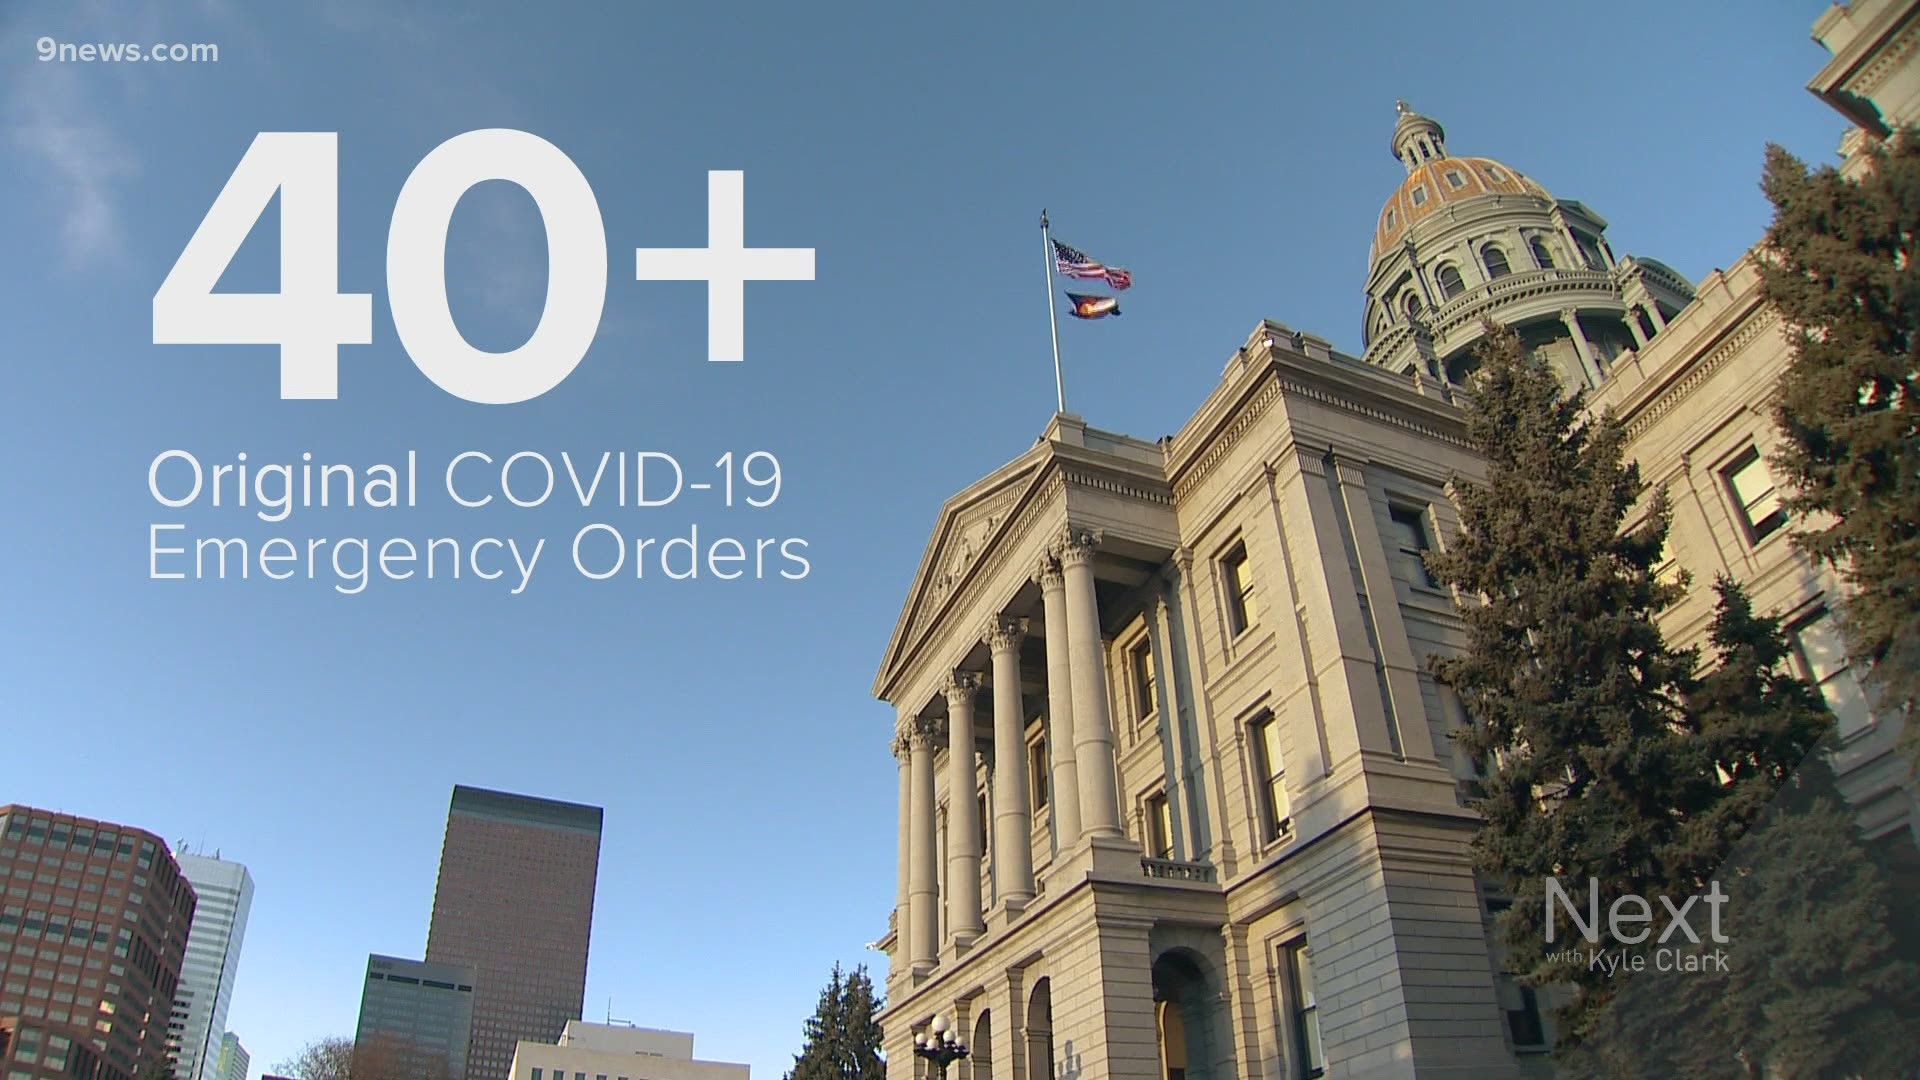 Colorado entered a disaster emergency due to COVID-19 six months ago. Since, Polis has issued 177 executive orders related to COVID-19 not counting a mask extension.